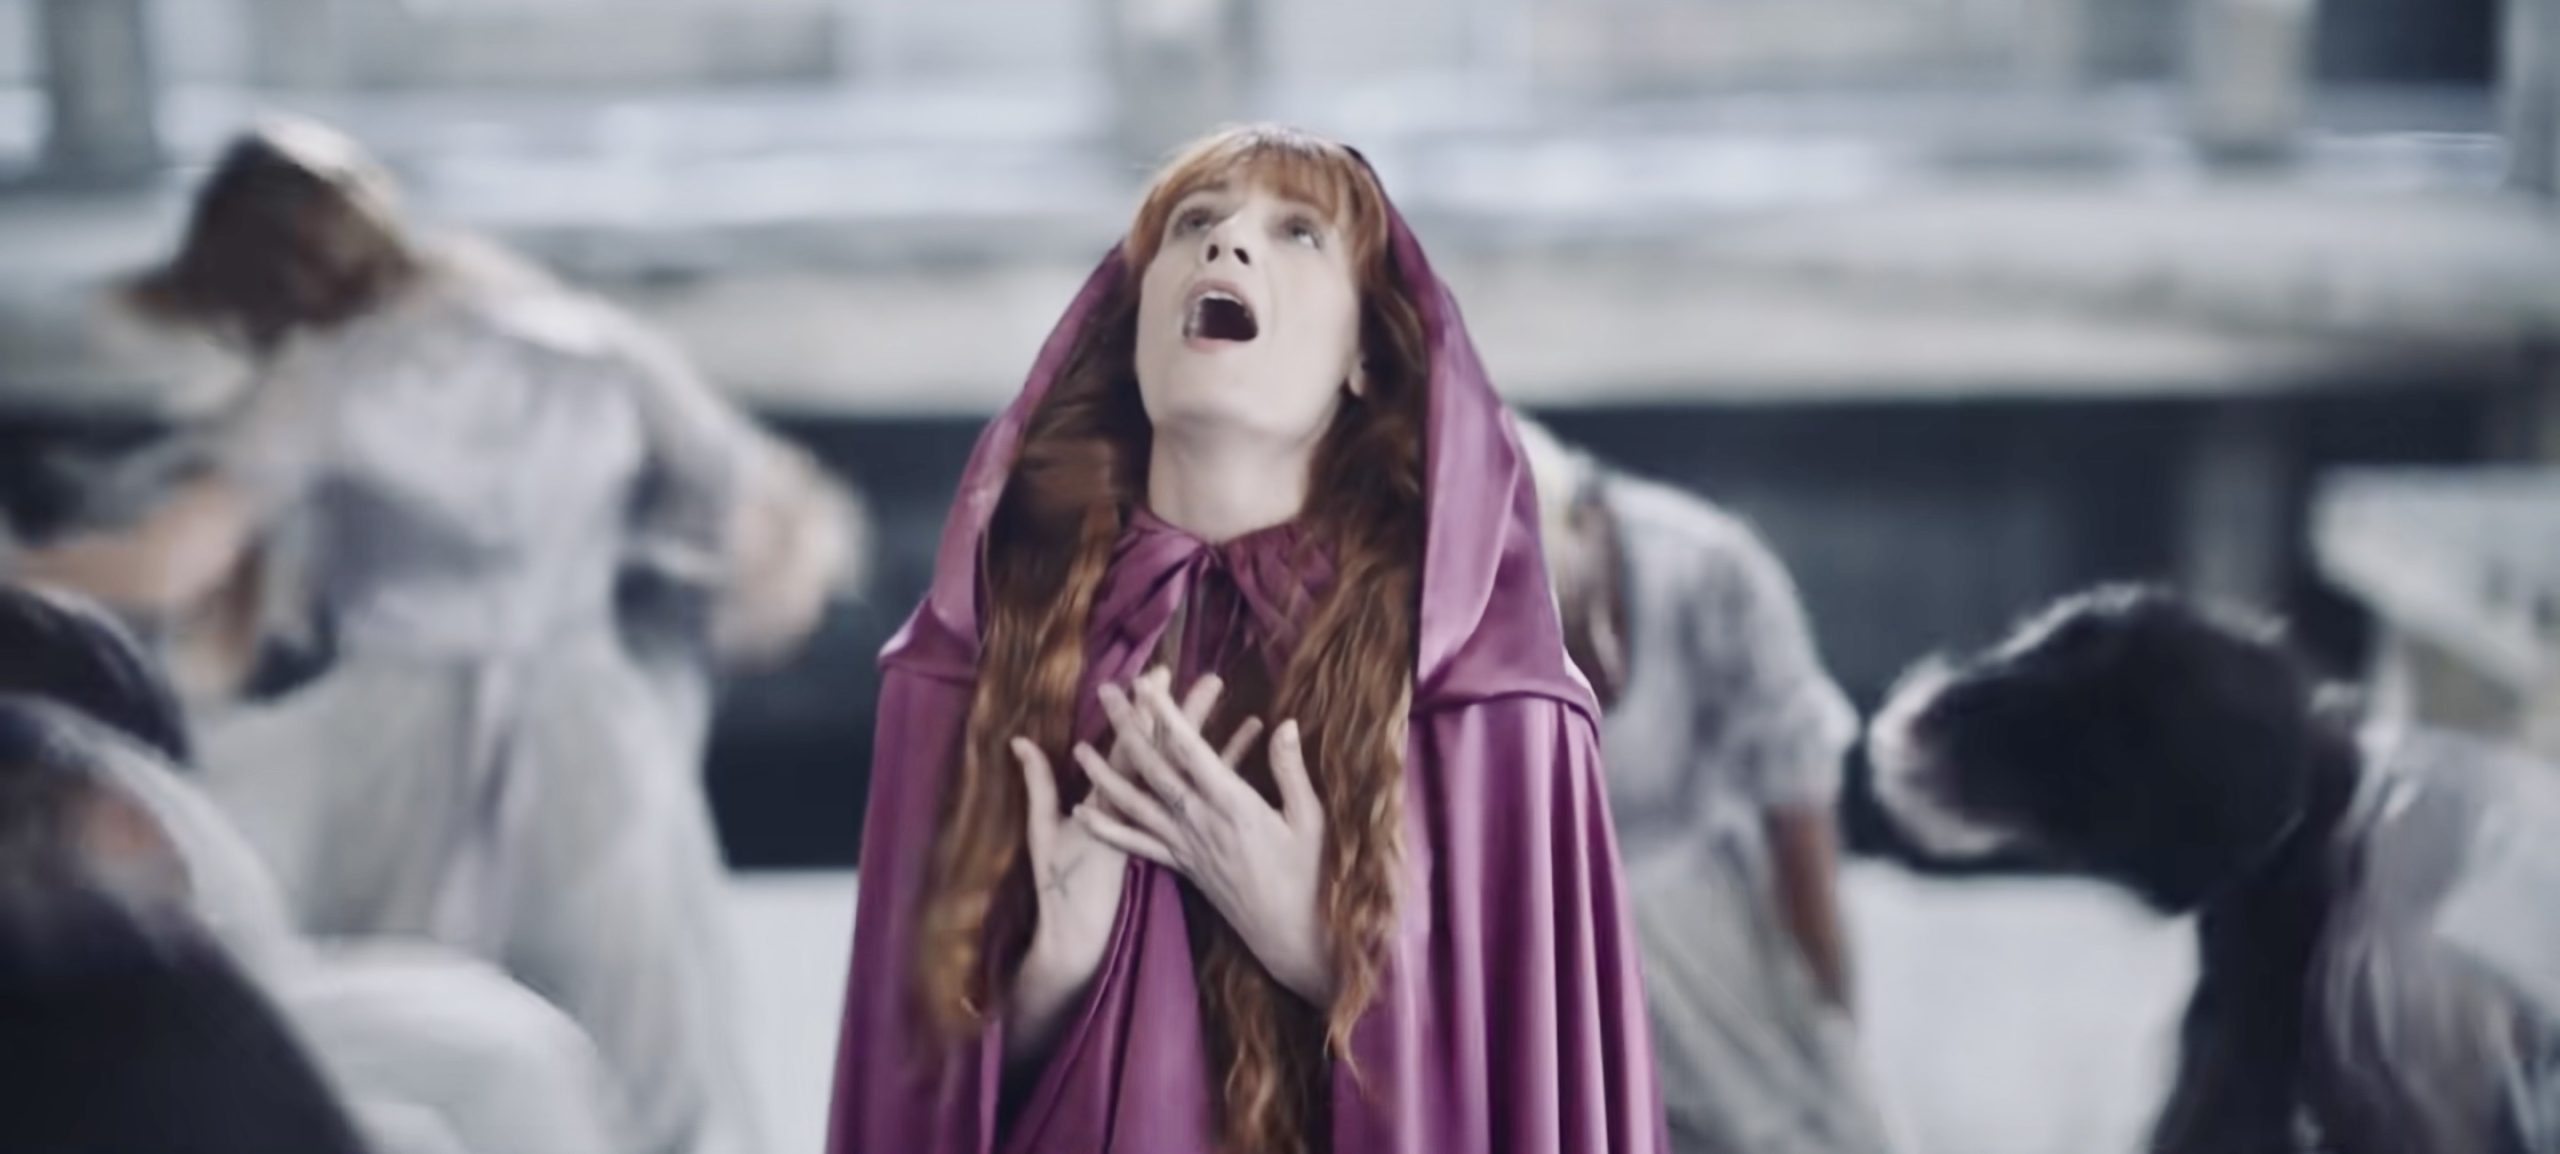 Ejekt Festival | Florence and the Machine – Live στην Αθήνα την Κυριακή 2 Ιουλίου 2023